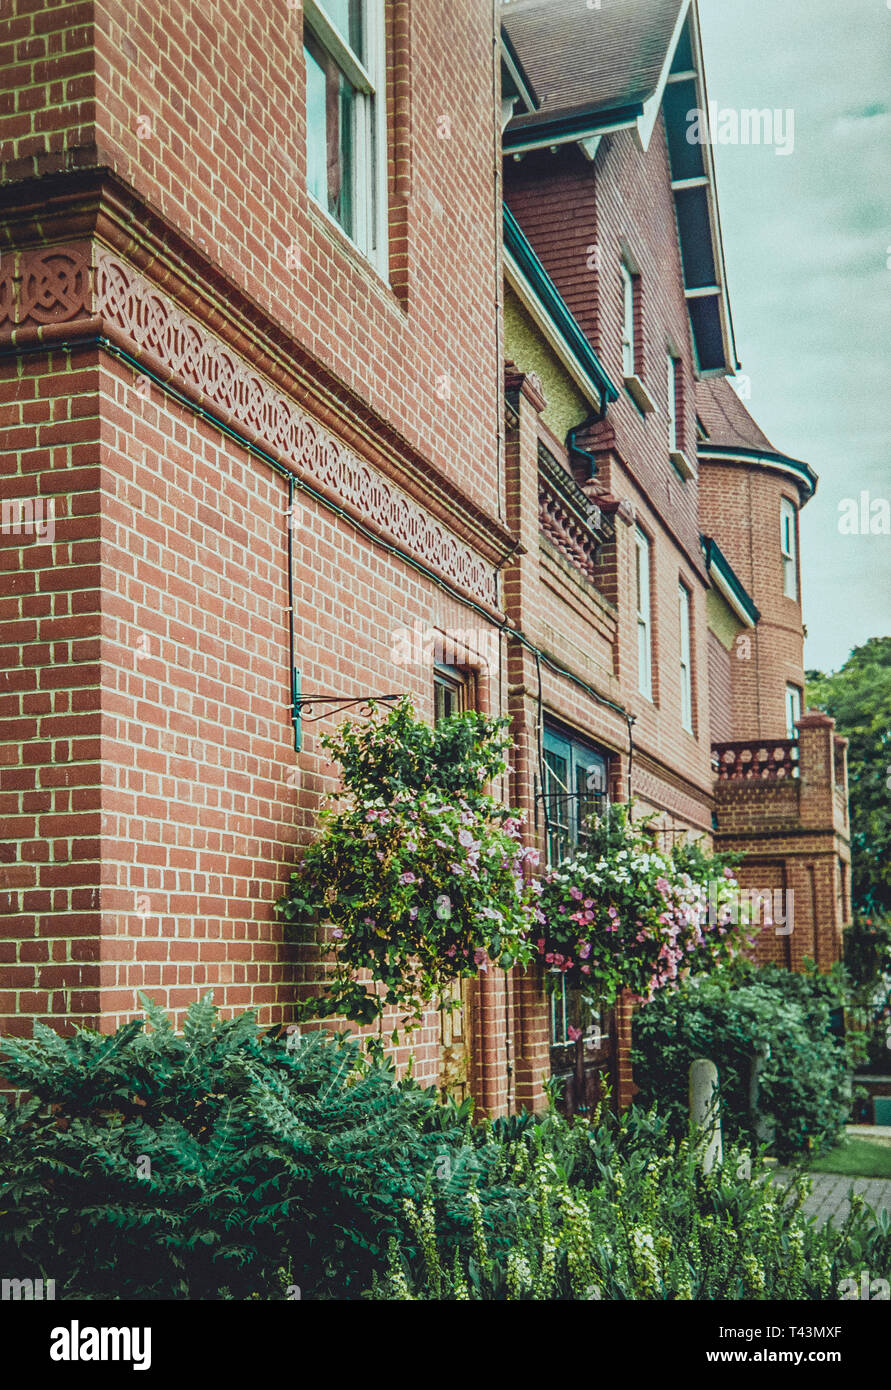 Red brick facade of an old English mansion Stock Photo